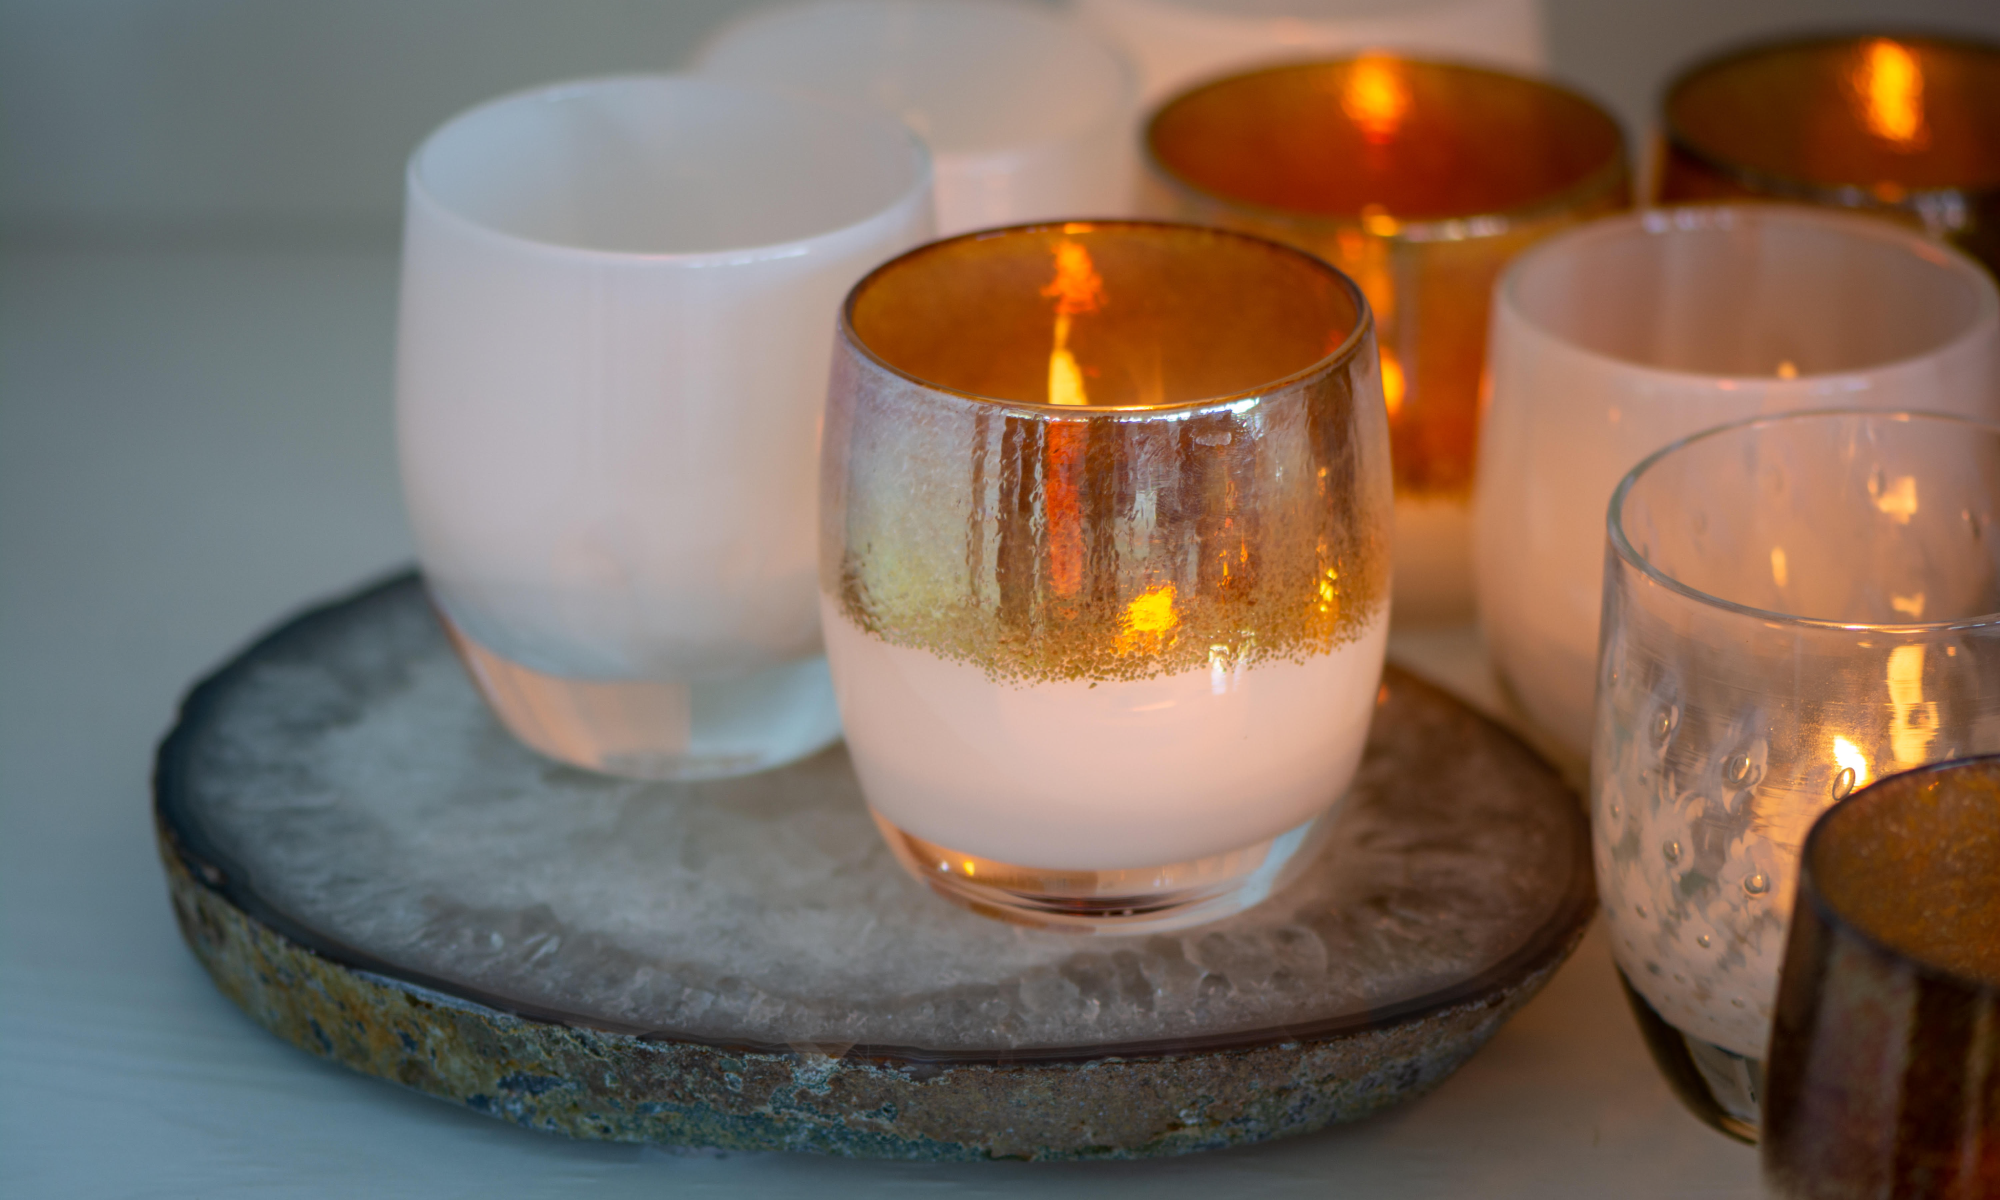 grace white with gold, hope white, yes white bubble, hand-blown glass votive candle holders